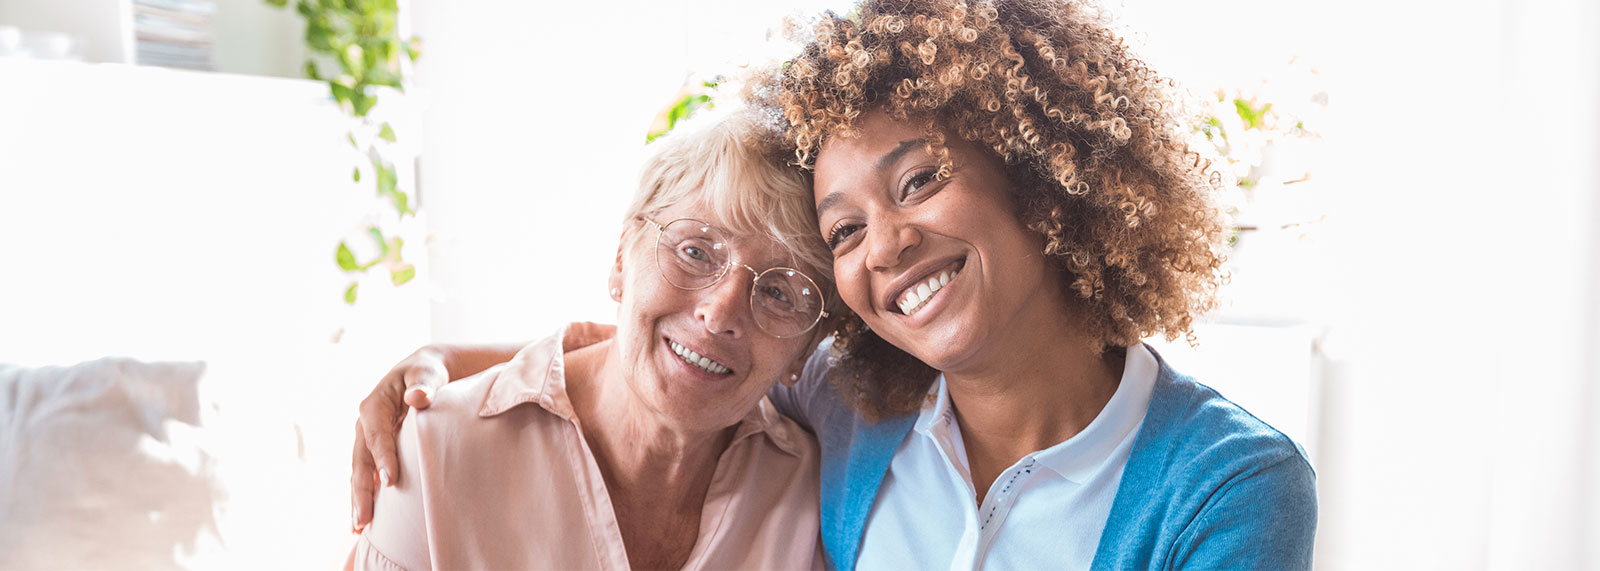 female caregiver with her arm around senior woman's shoulders